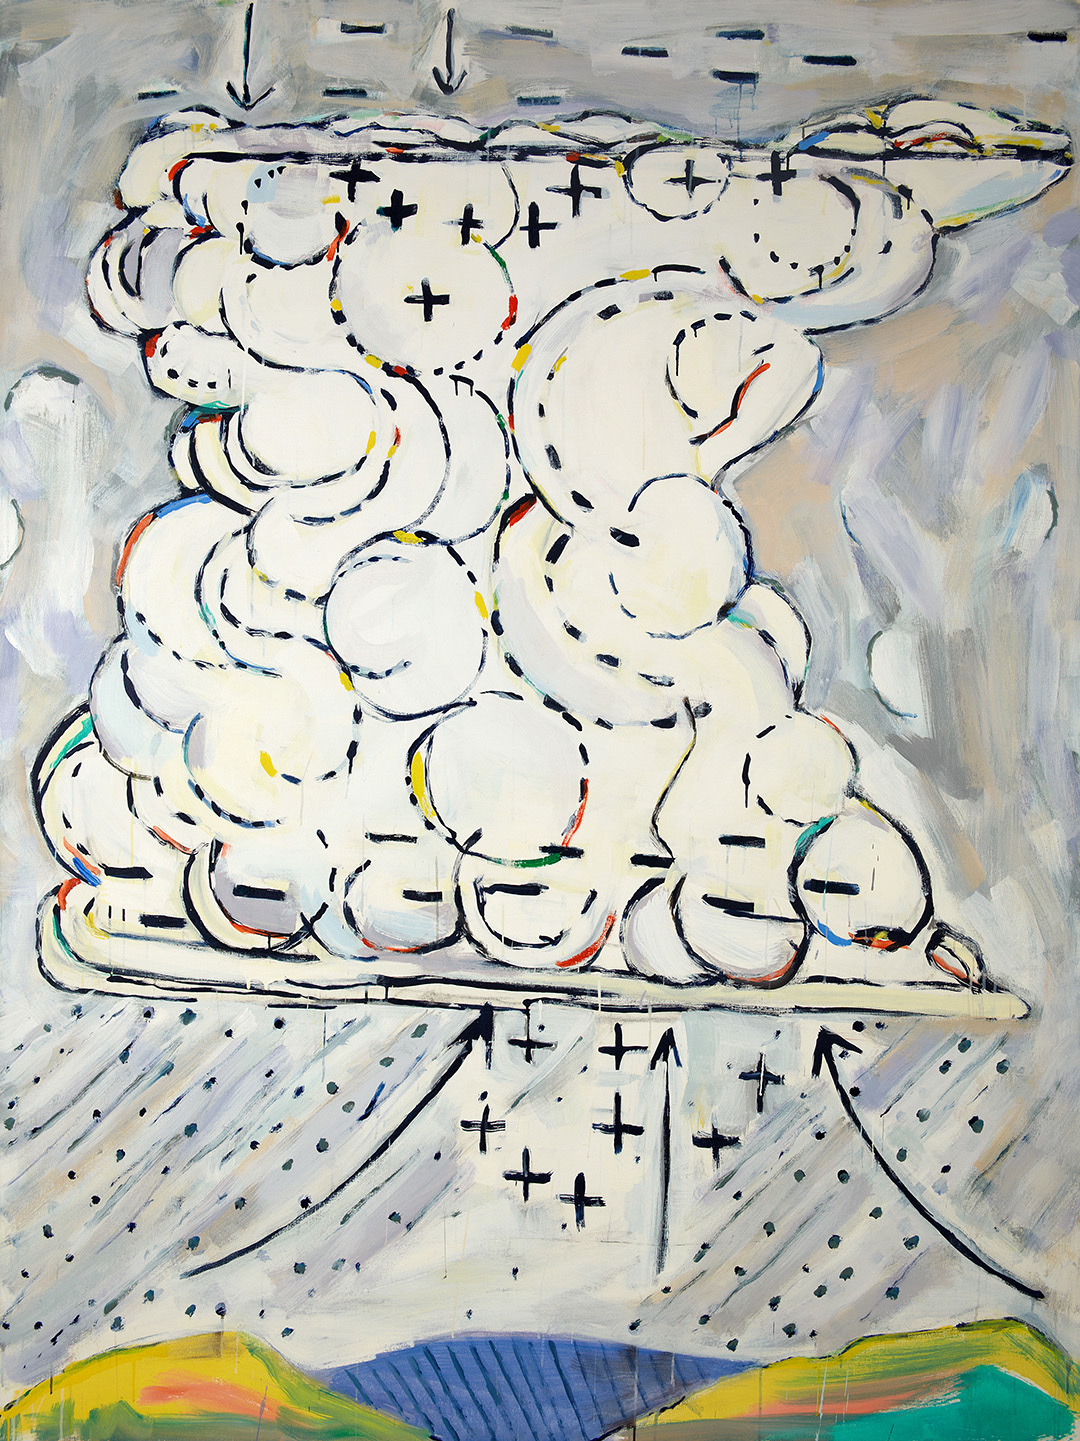 Thunder Cloud as Generator #2, 1971, by Paterson Ewen